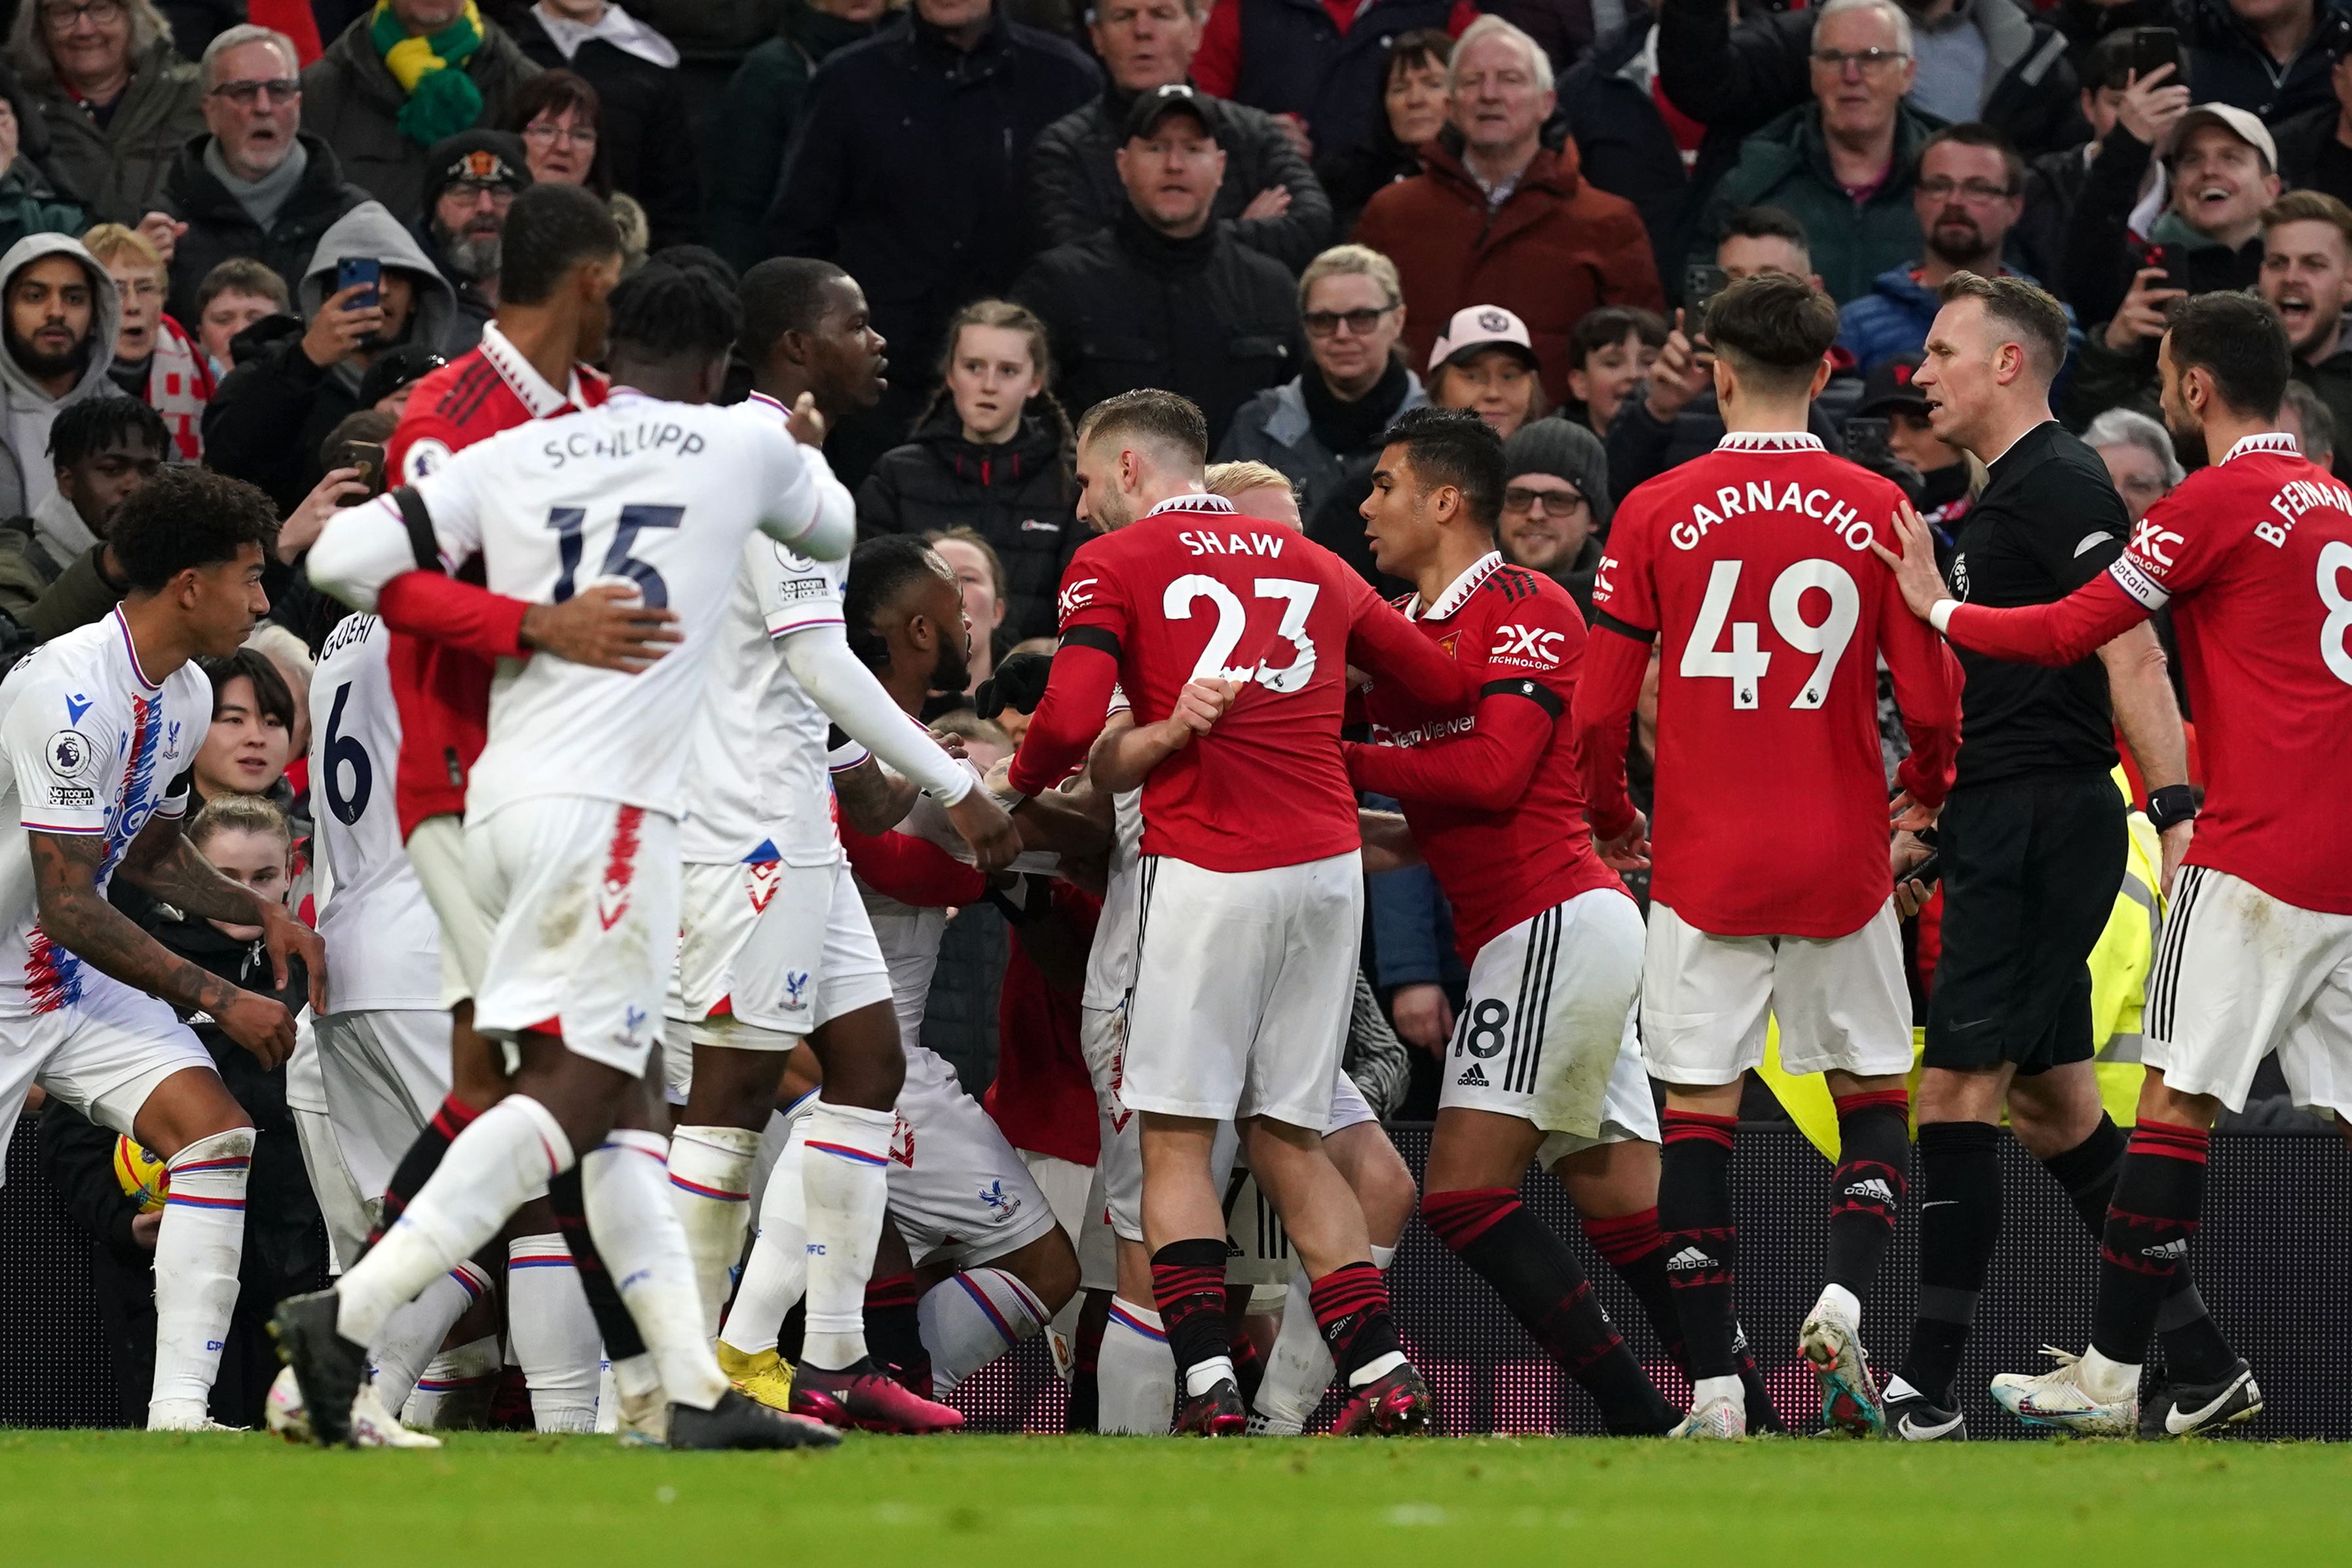 Tempers flared between Manchester United and Crystal Palace players during last month’s Premier League game (Martin Rickett/PA)